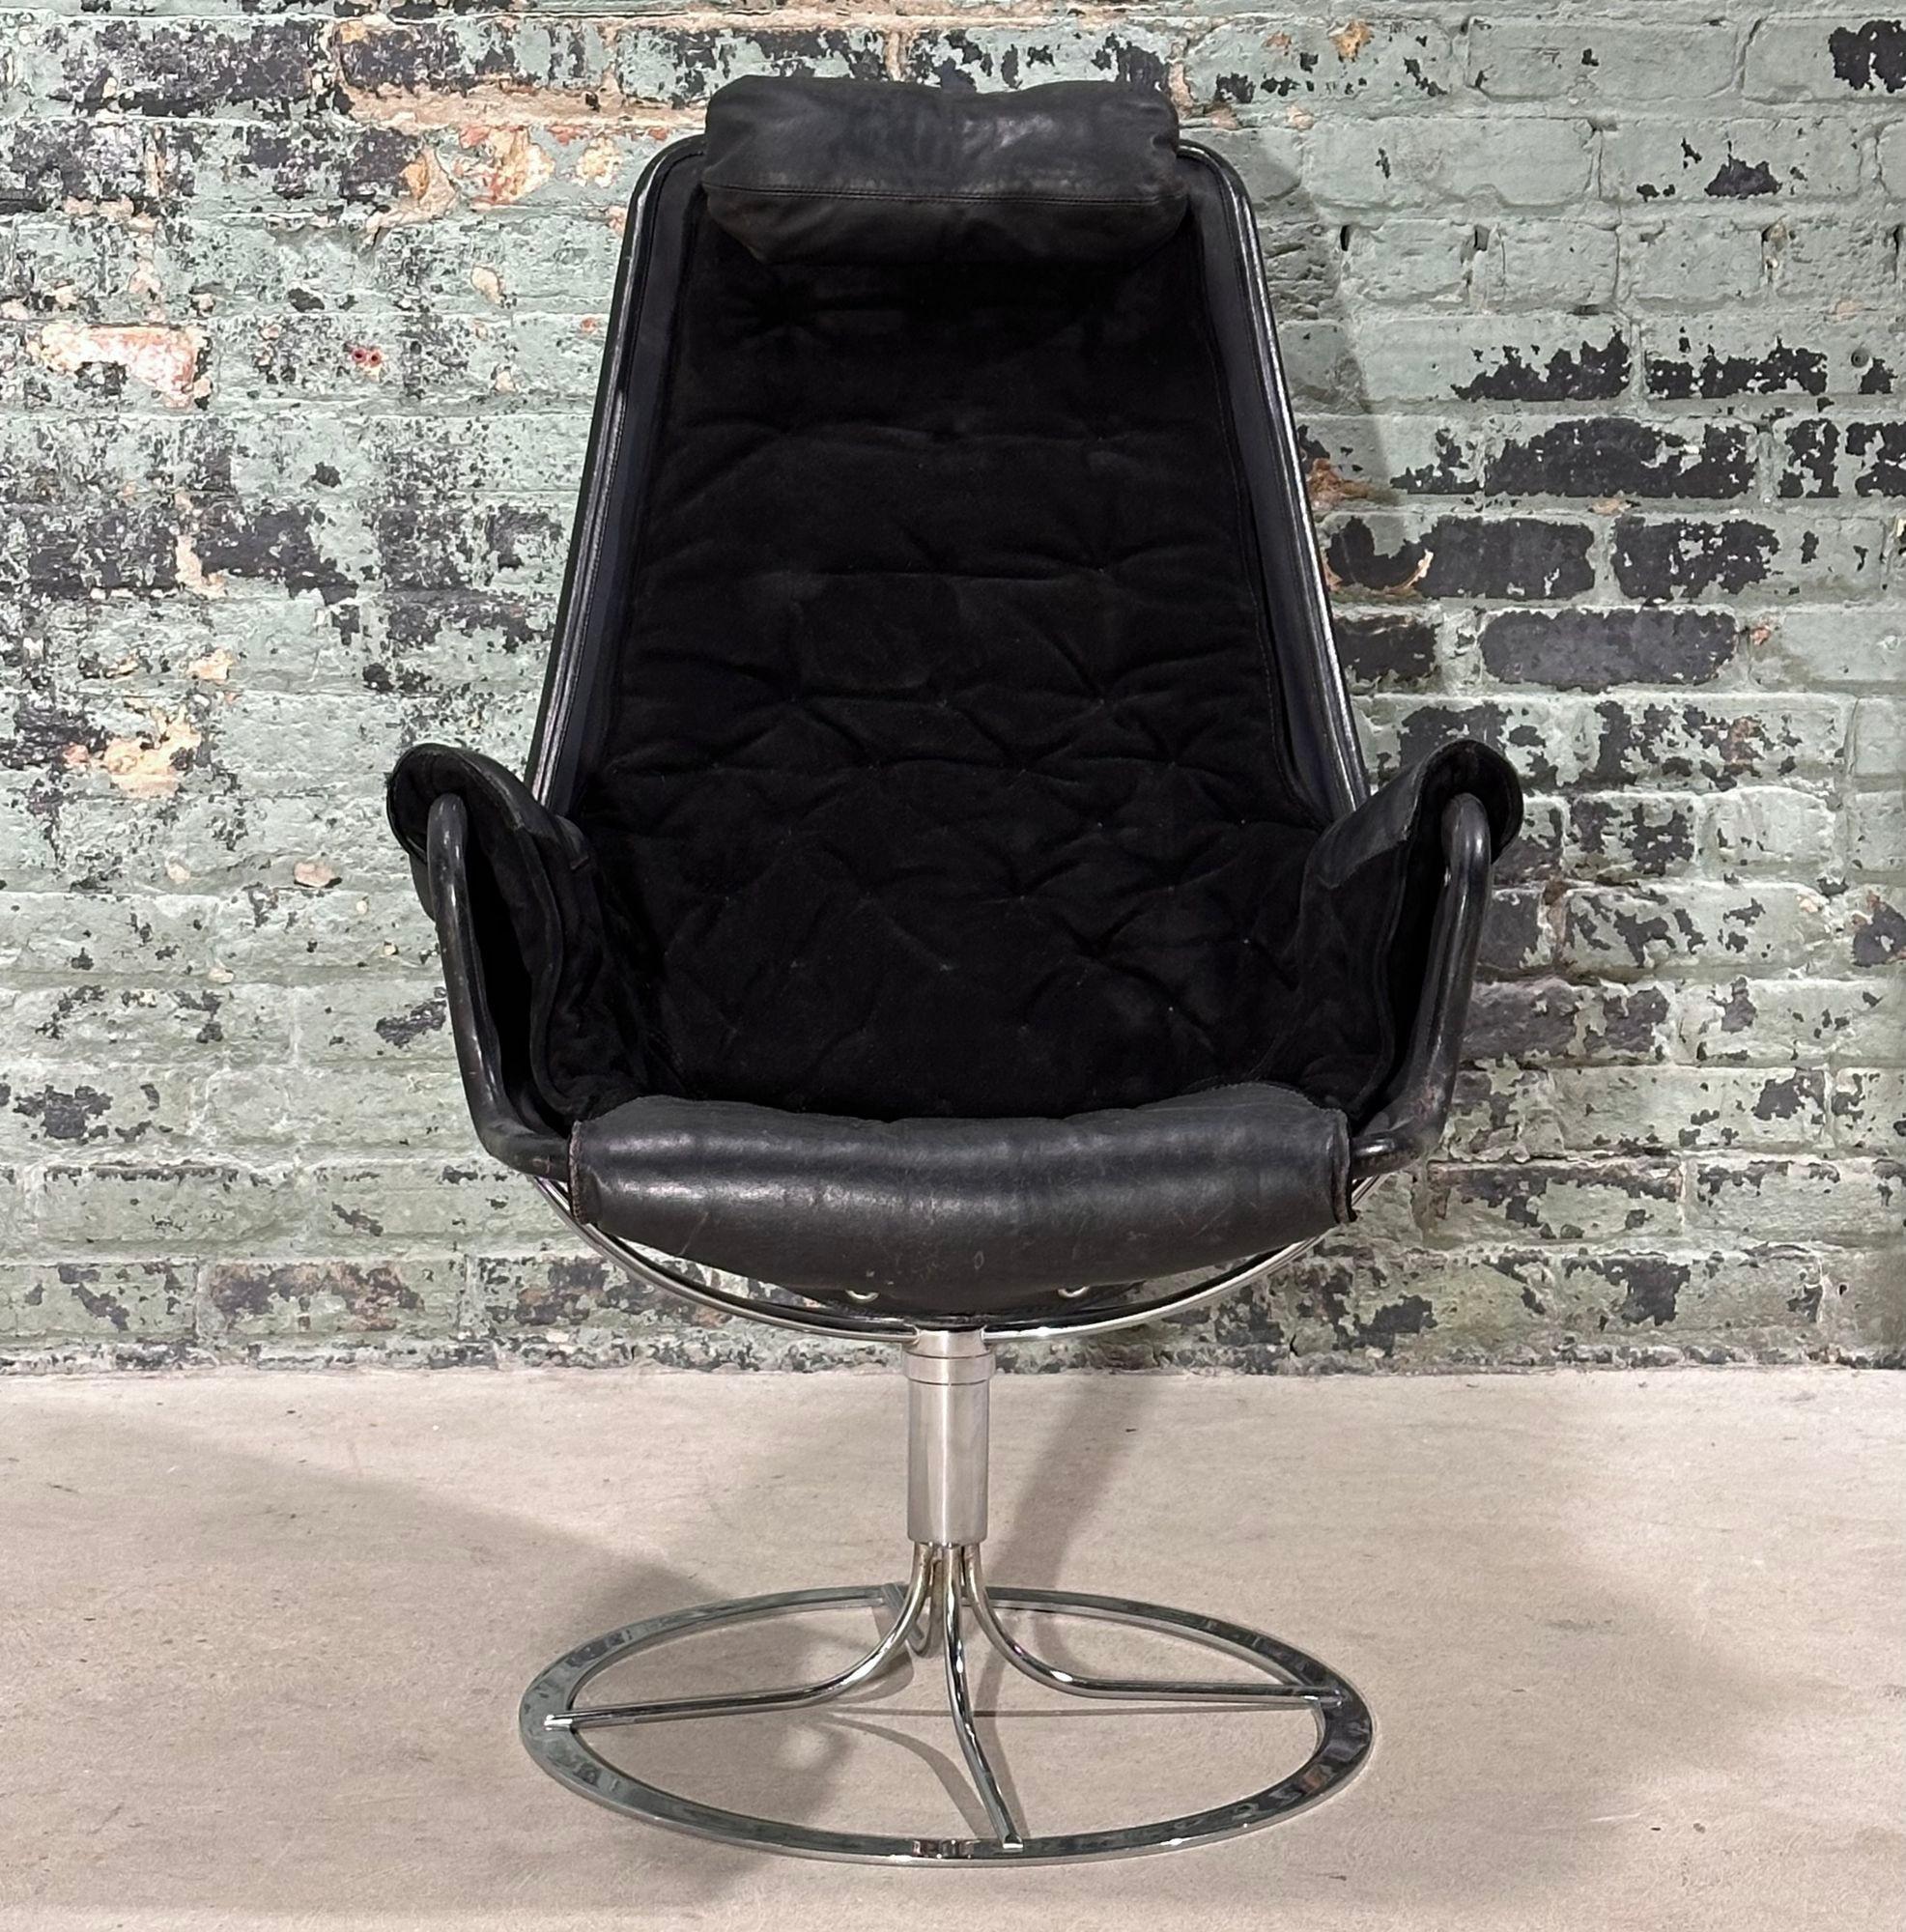 Bruno Mathsson Suede and Leather Jetson Swivel Chair, Dux Sweden 1969. Excellent condition
Measures 38